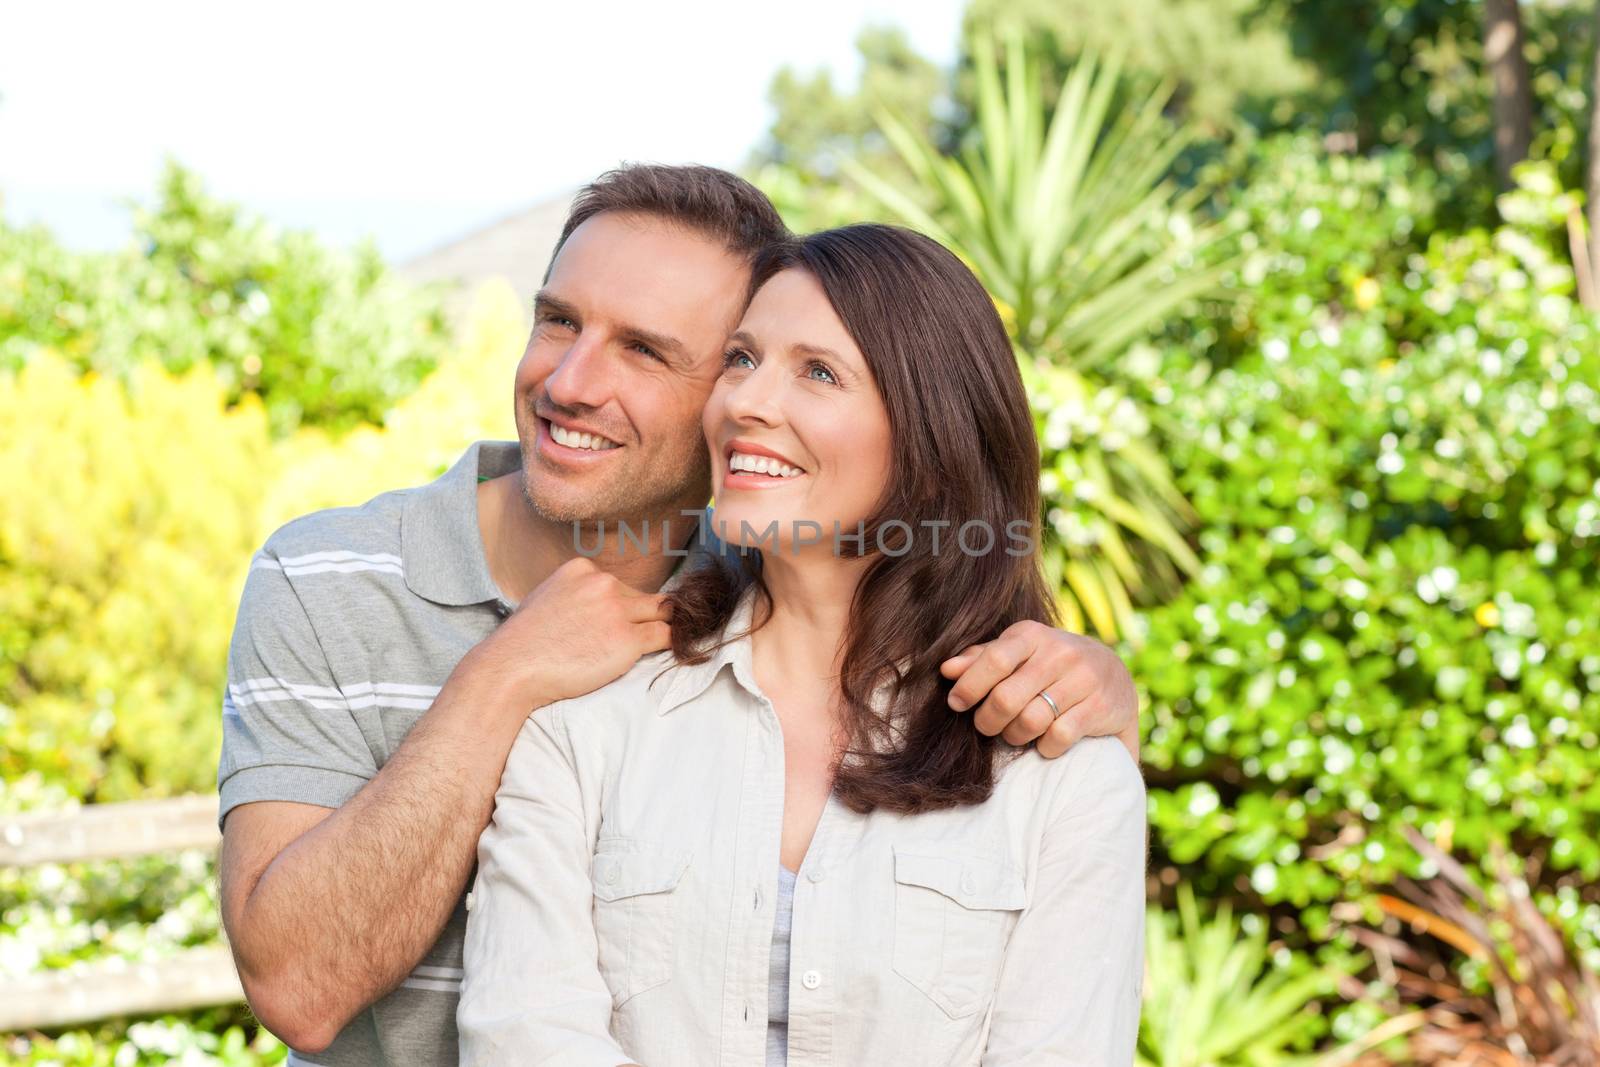 Beautiful woman with her husband in the garden